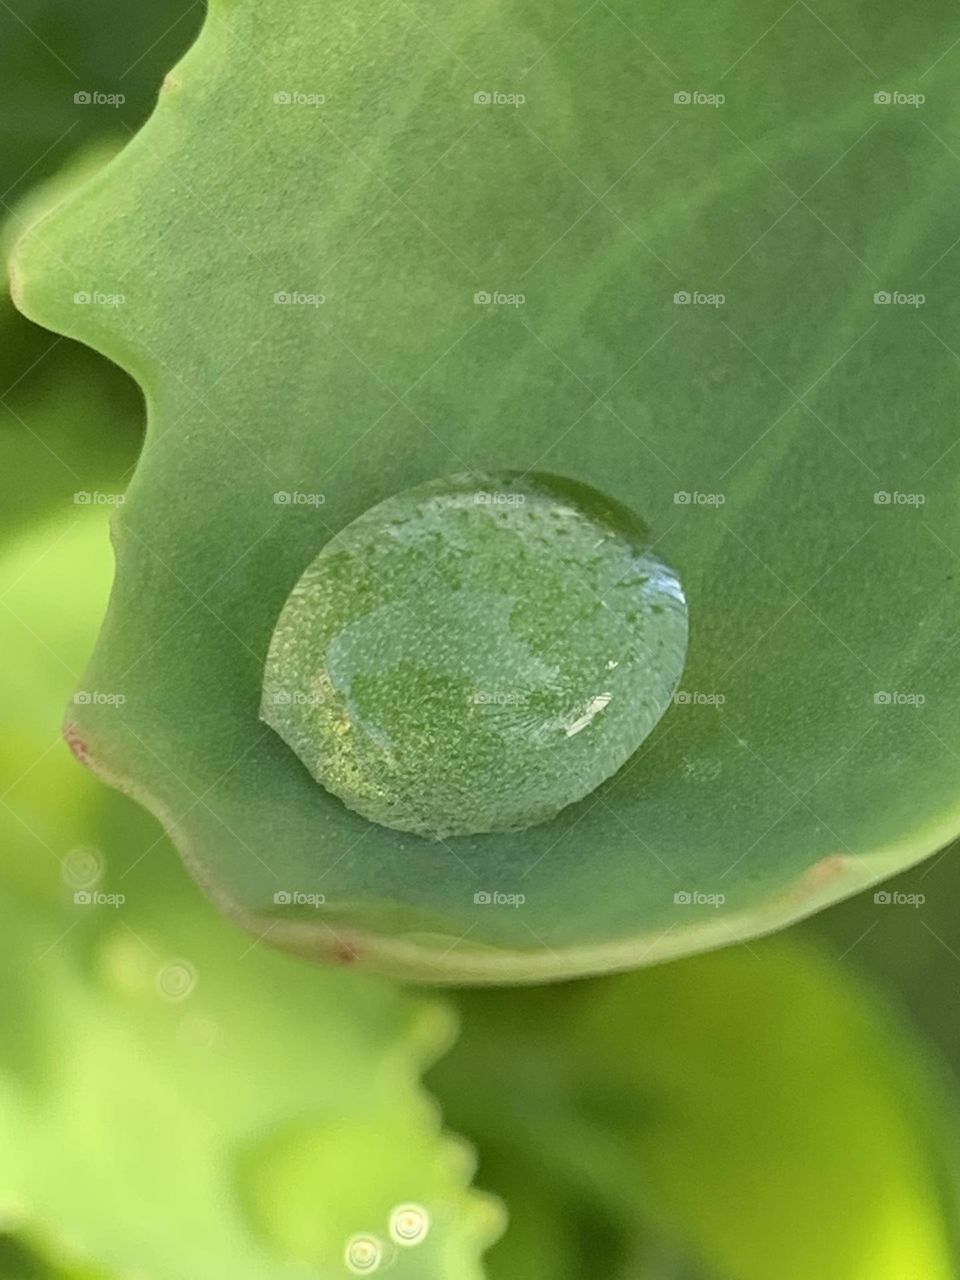 A small drop of water on the leaf of a plant